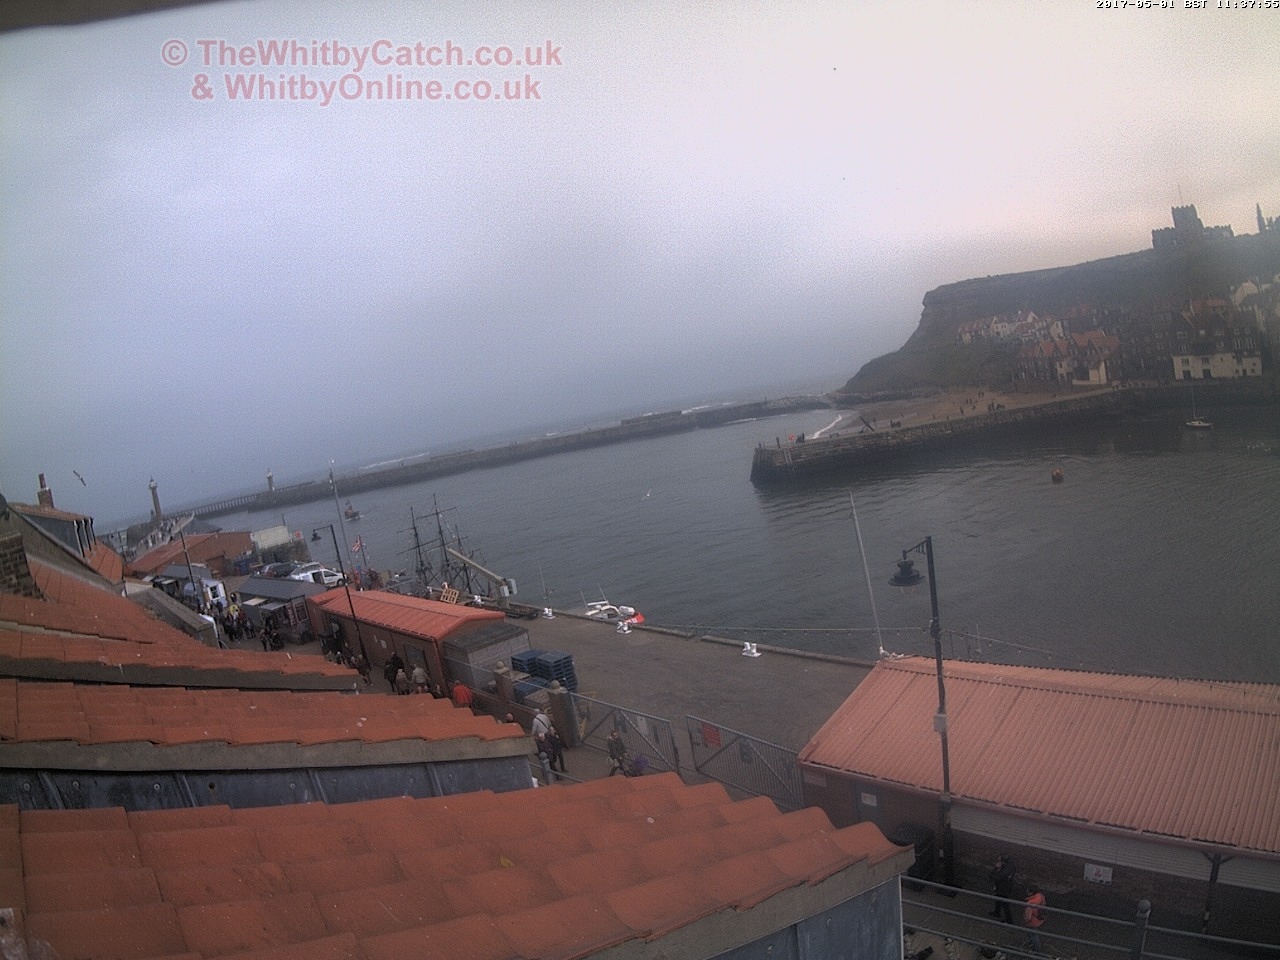 Whitby Mon 1st May 2017 11:38.